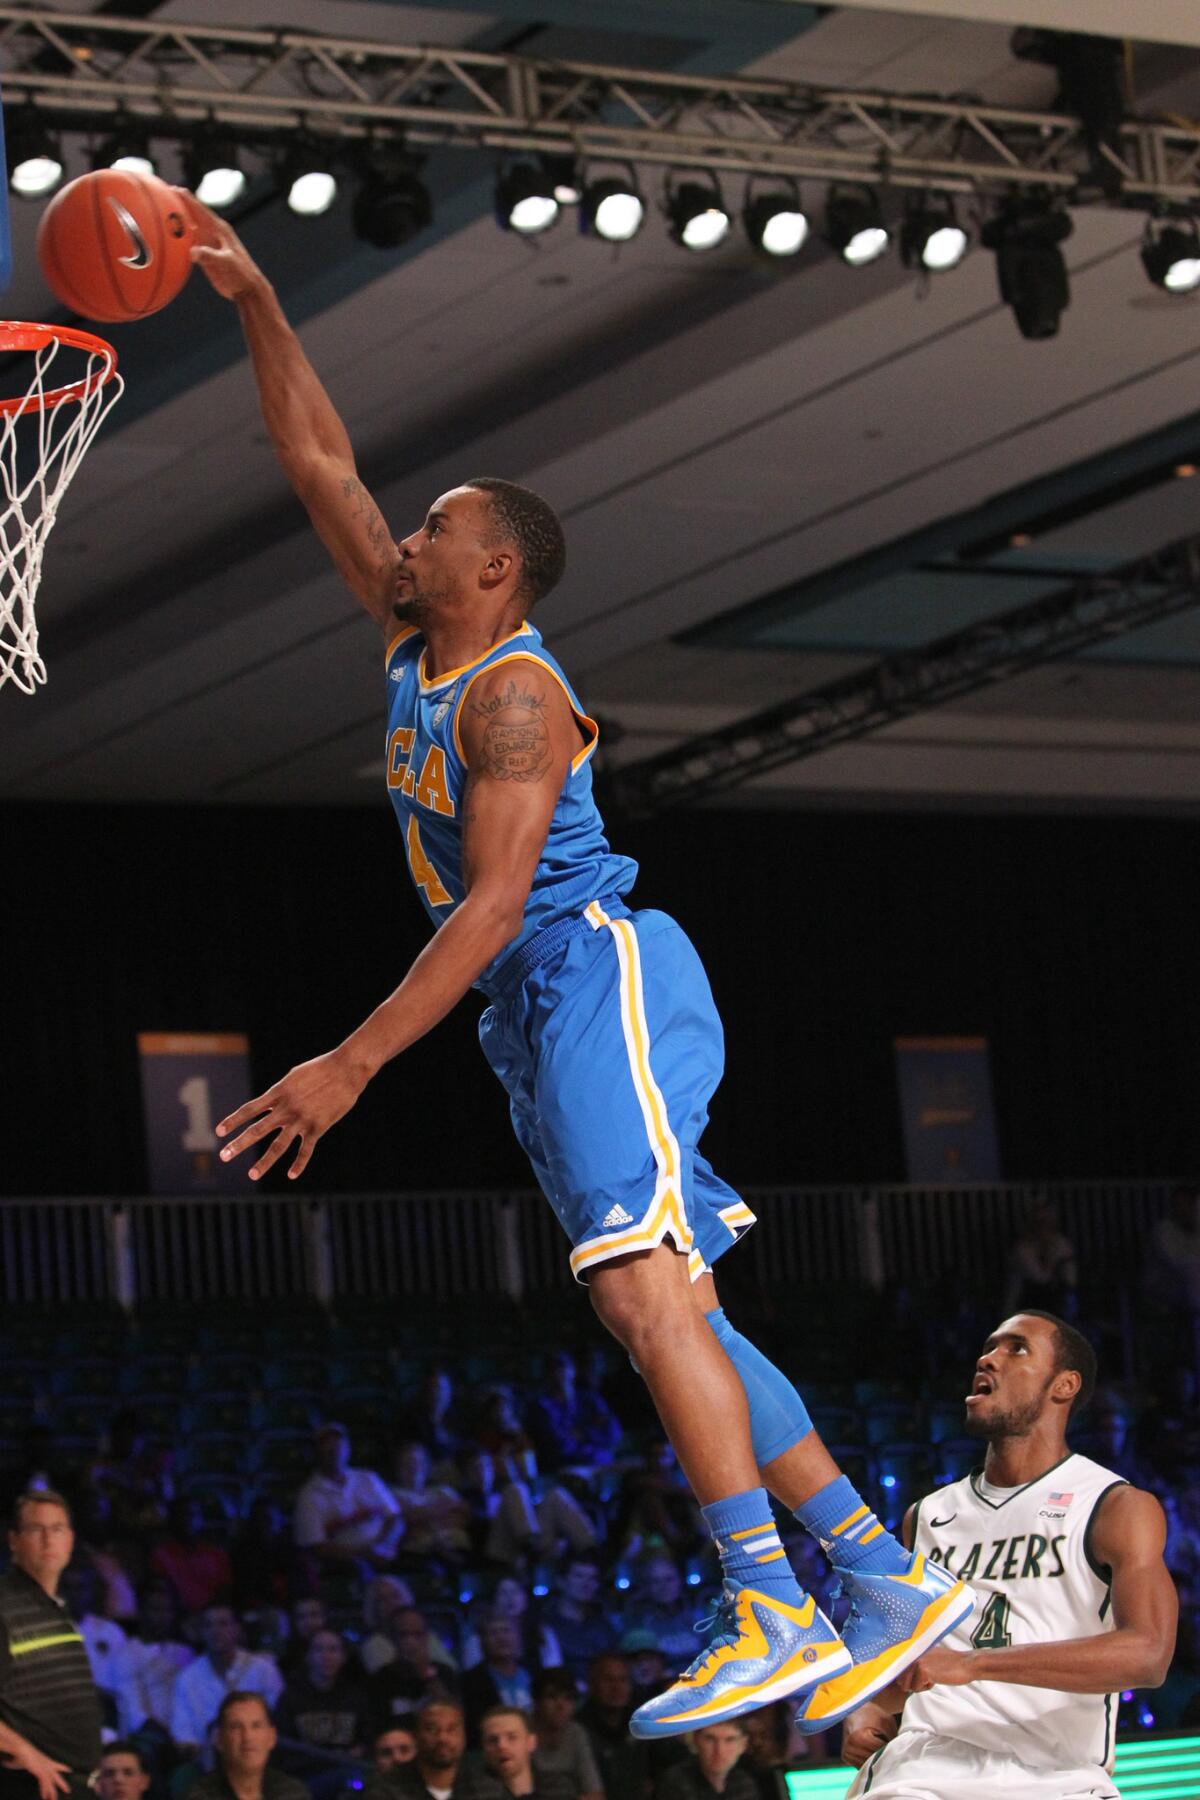 UCLA guard Normal Powell goes for a dunk against UAB during the Bruins' 88-76 win Friday over the Blazers at the Battle 4 Atlantis.